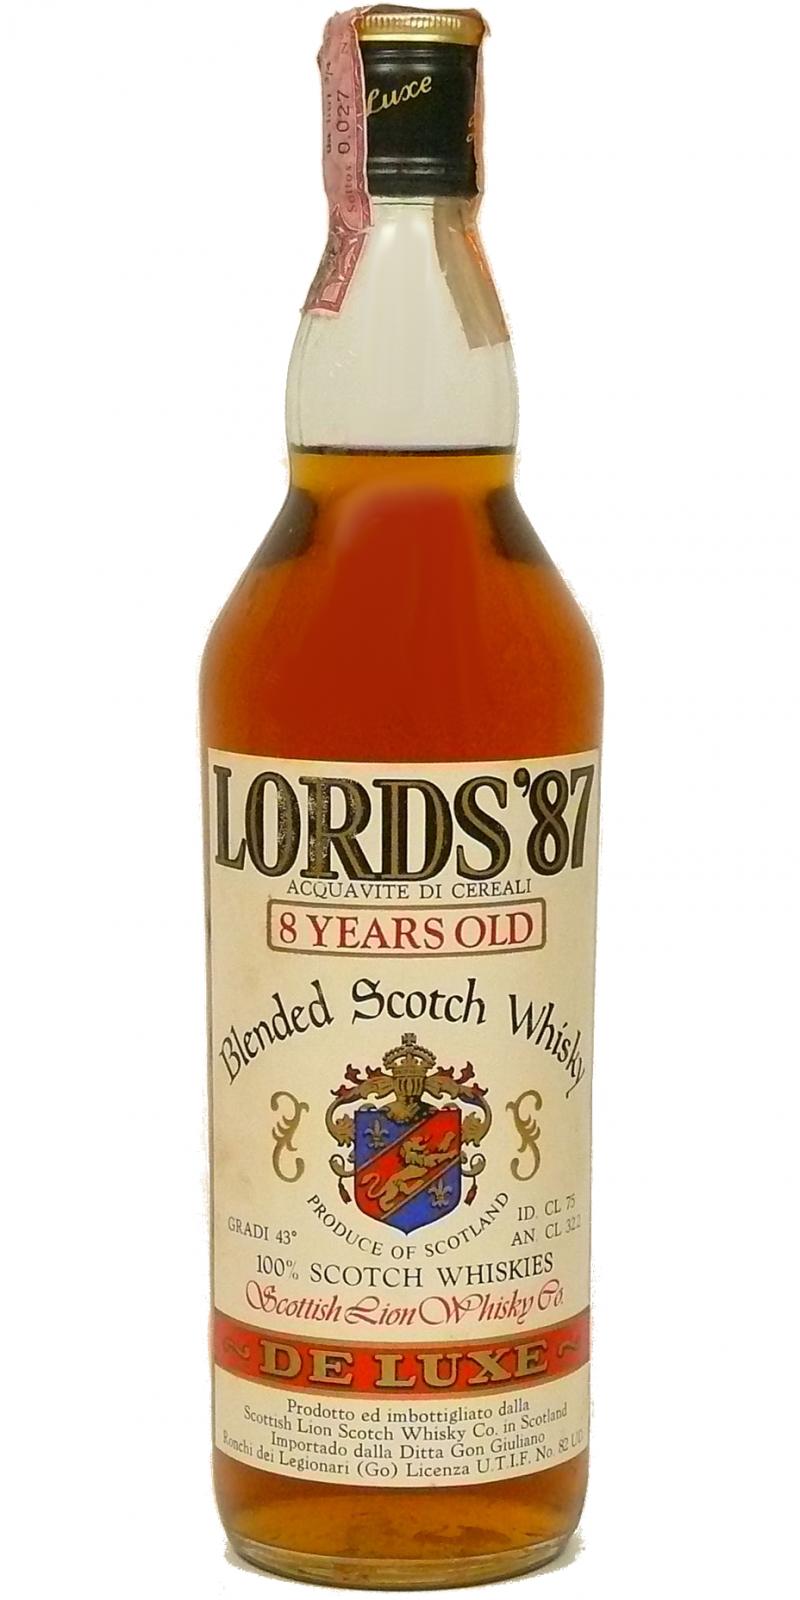 Lords '87 08-year-old